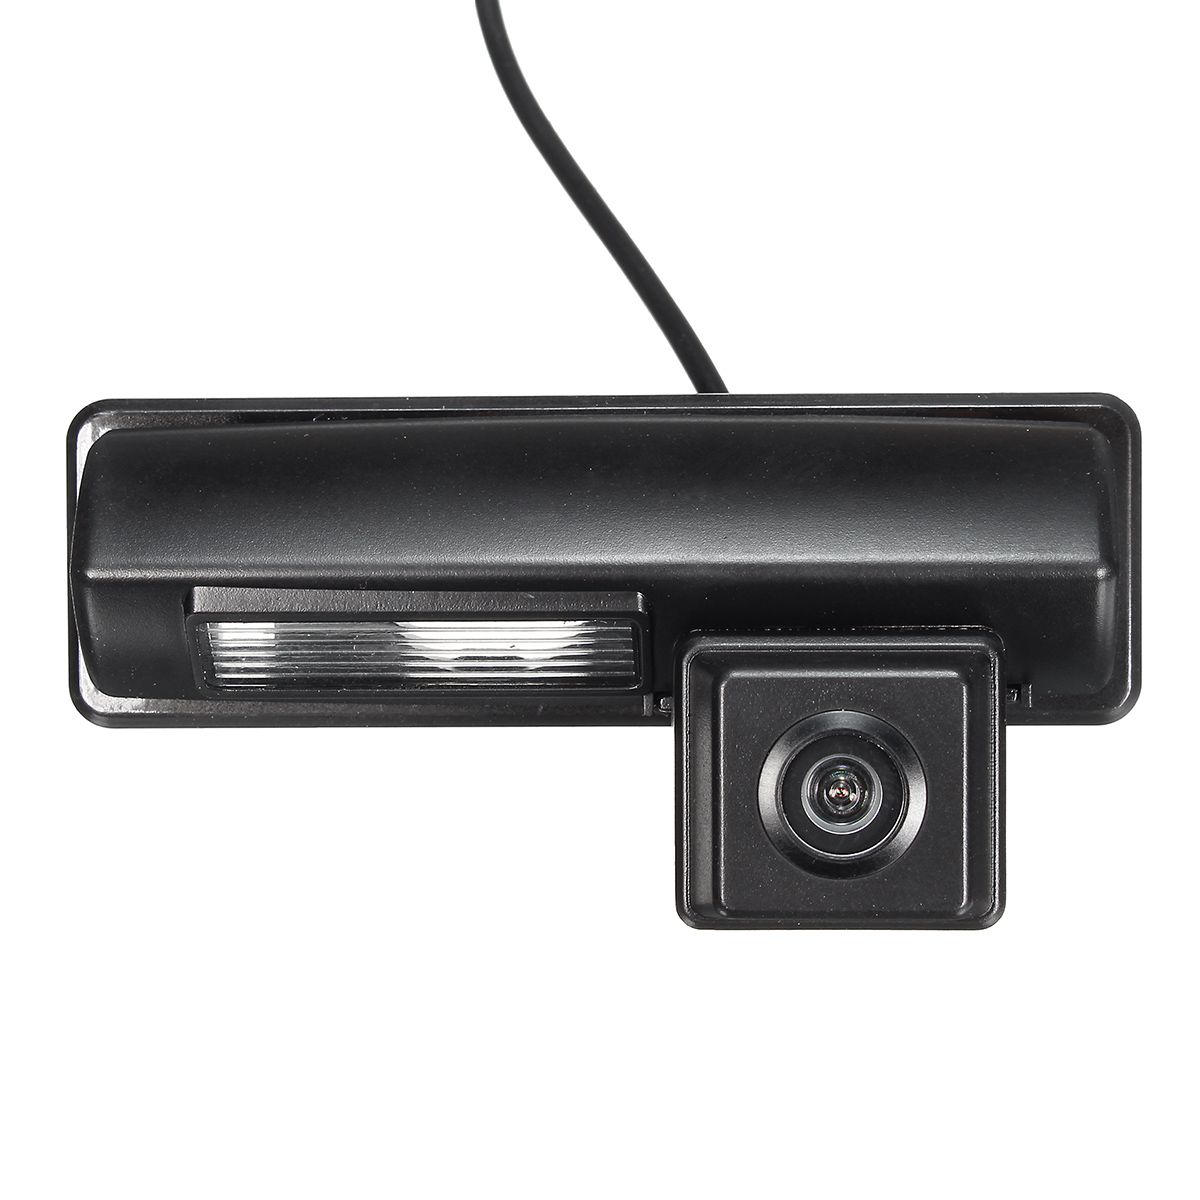 Car-Rear-View-Camera-Backup-Parking-Camera-For-Toyota-2007-And-2012-Camry-1114376